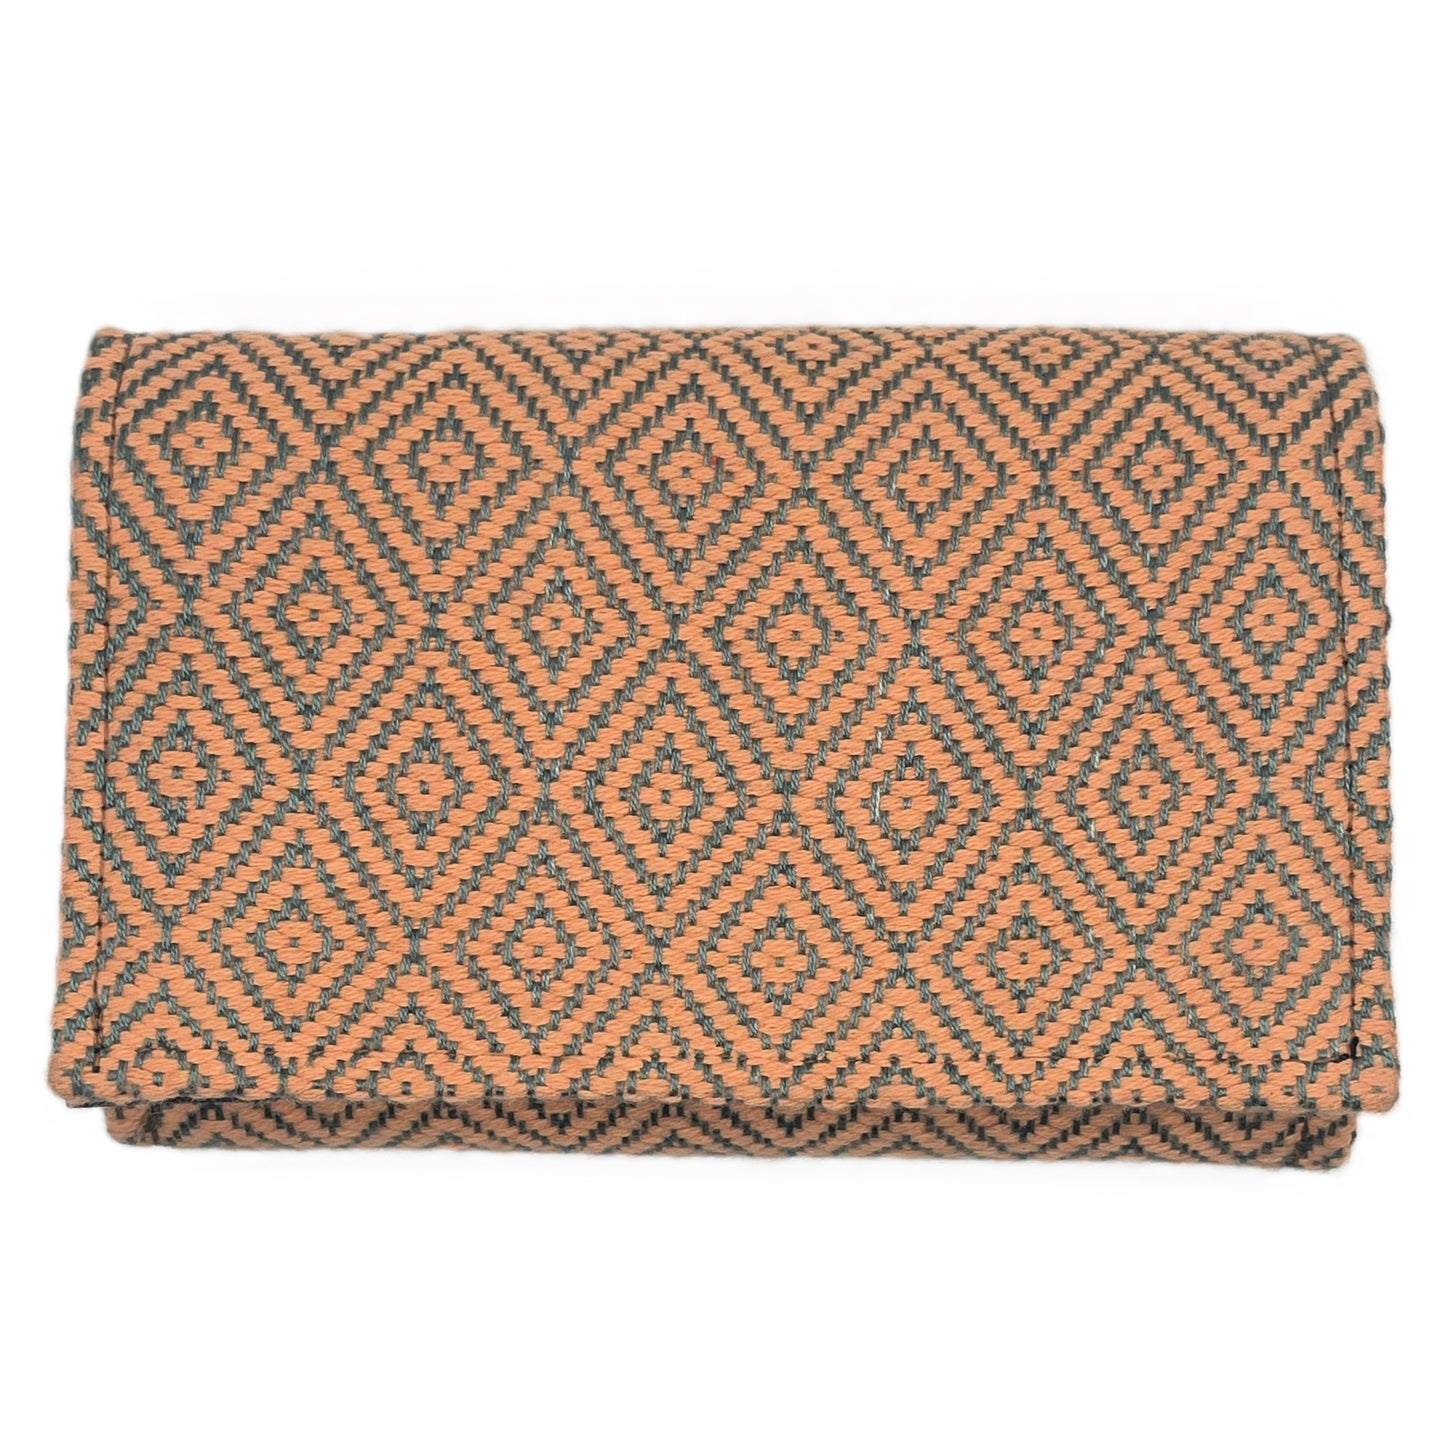 Fabric Purse | Wallet with Coin Zip Pocket